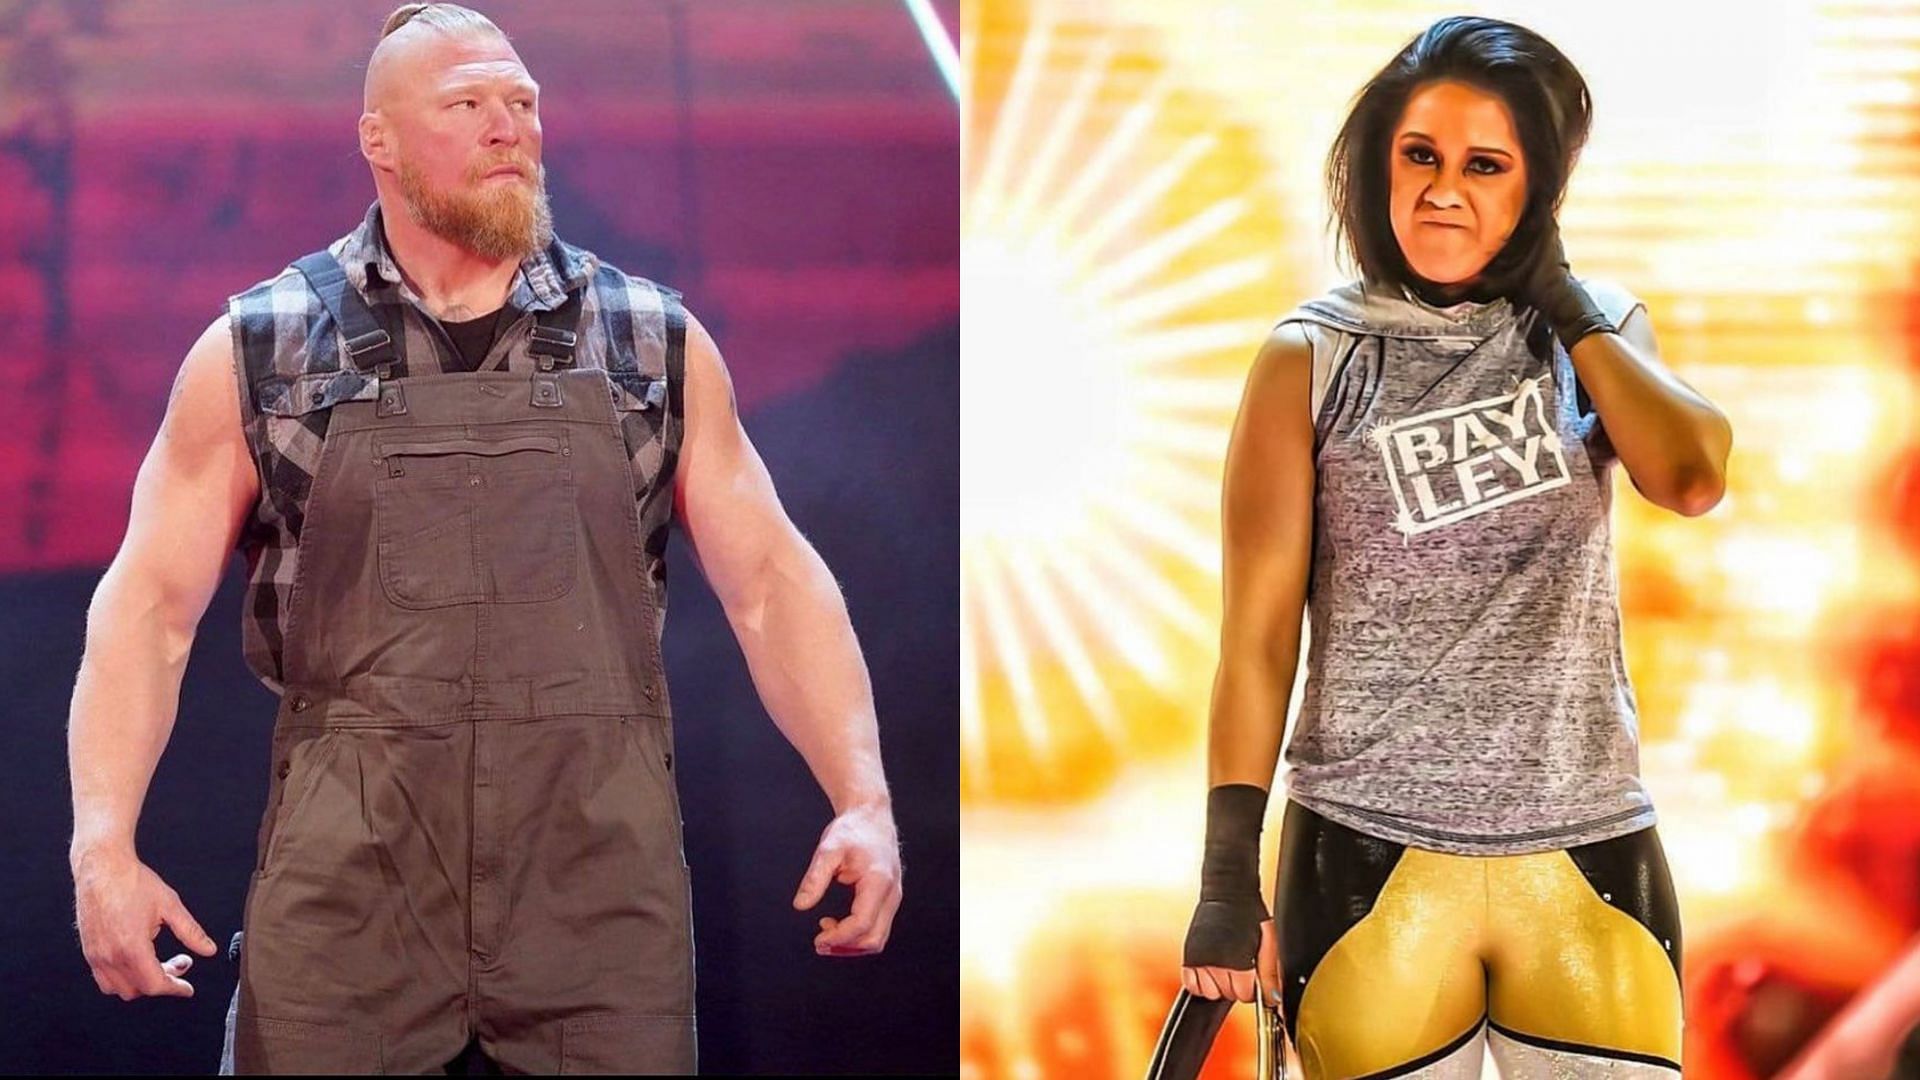 Brock Lesnar (left) and Bayley (right)